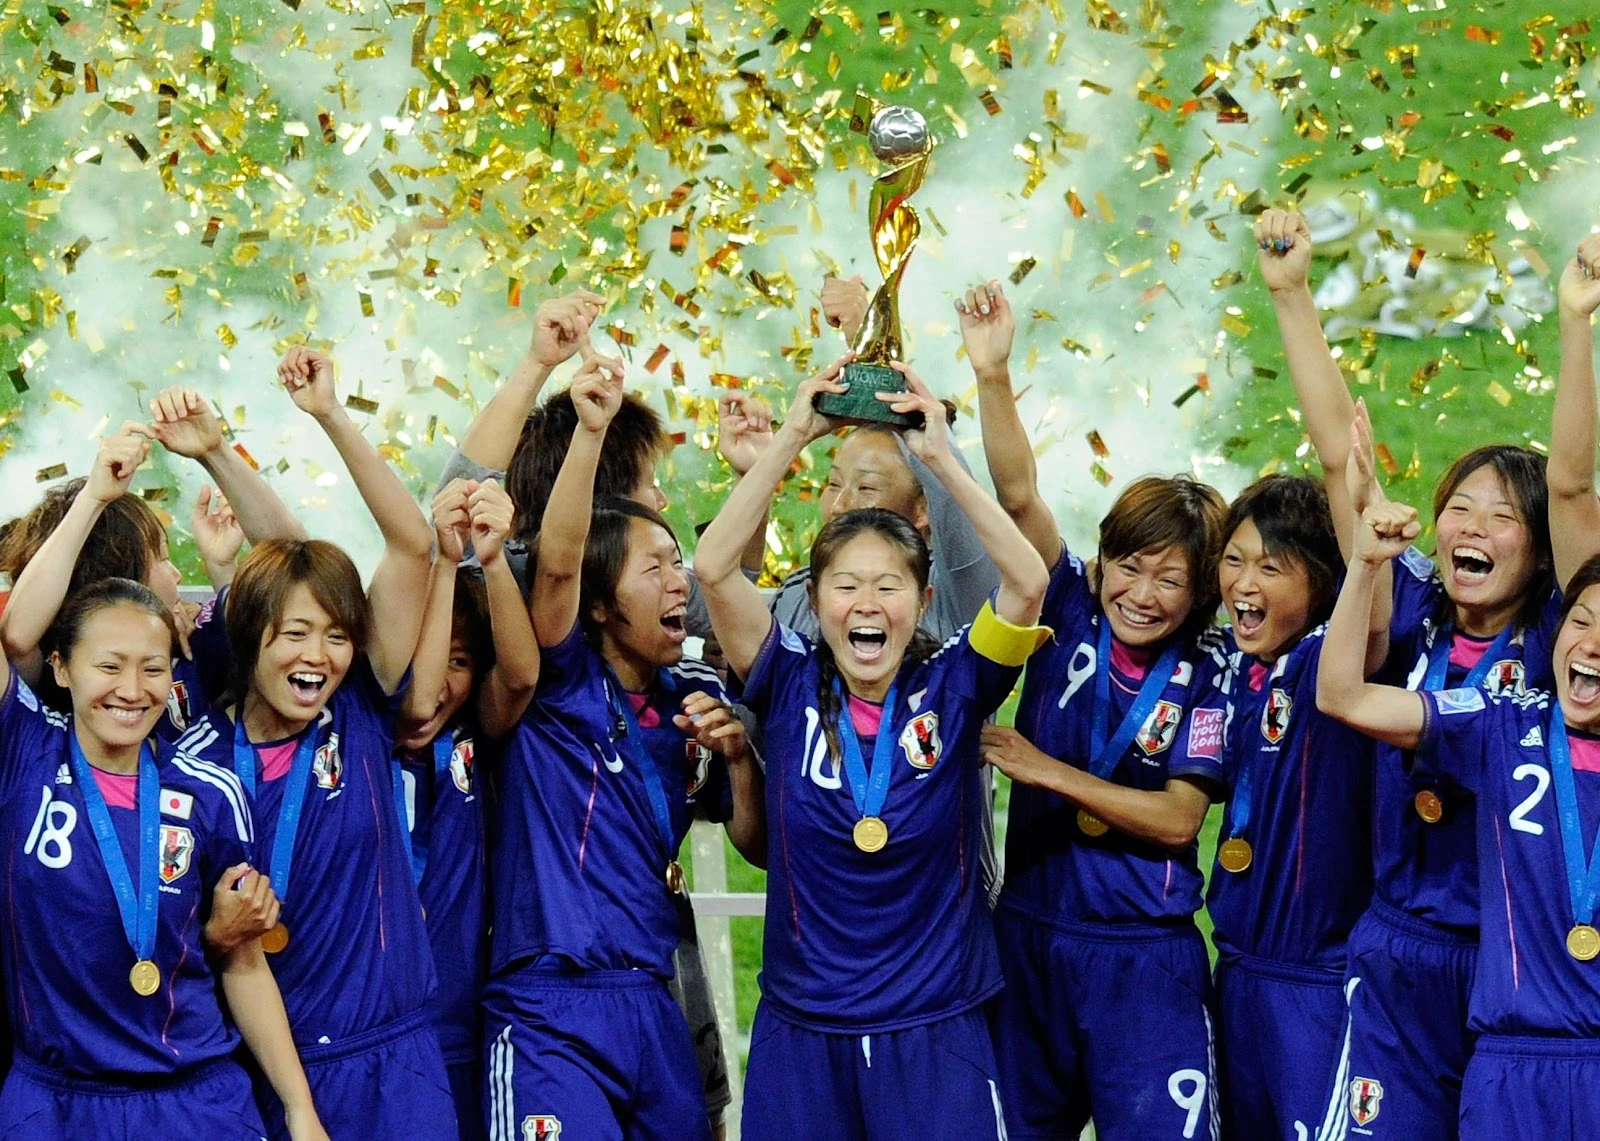 Players of Team Japan celebrate after winning the FIFA Womens's World Cup Final.